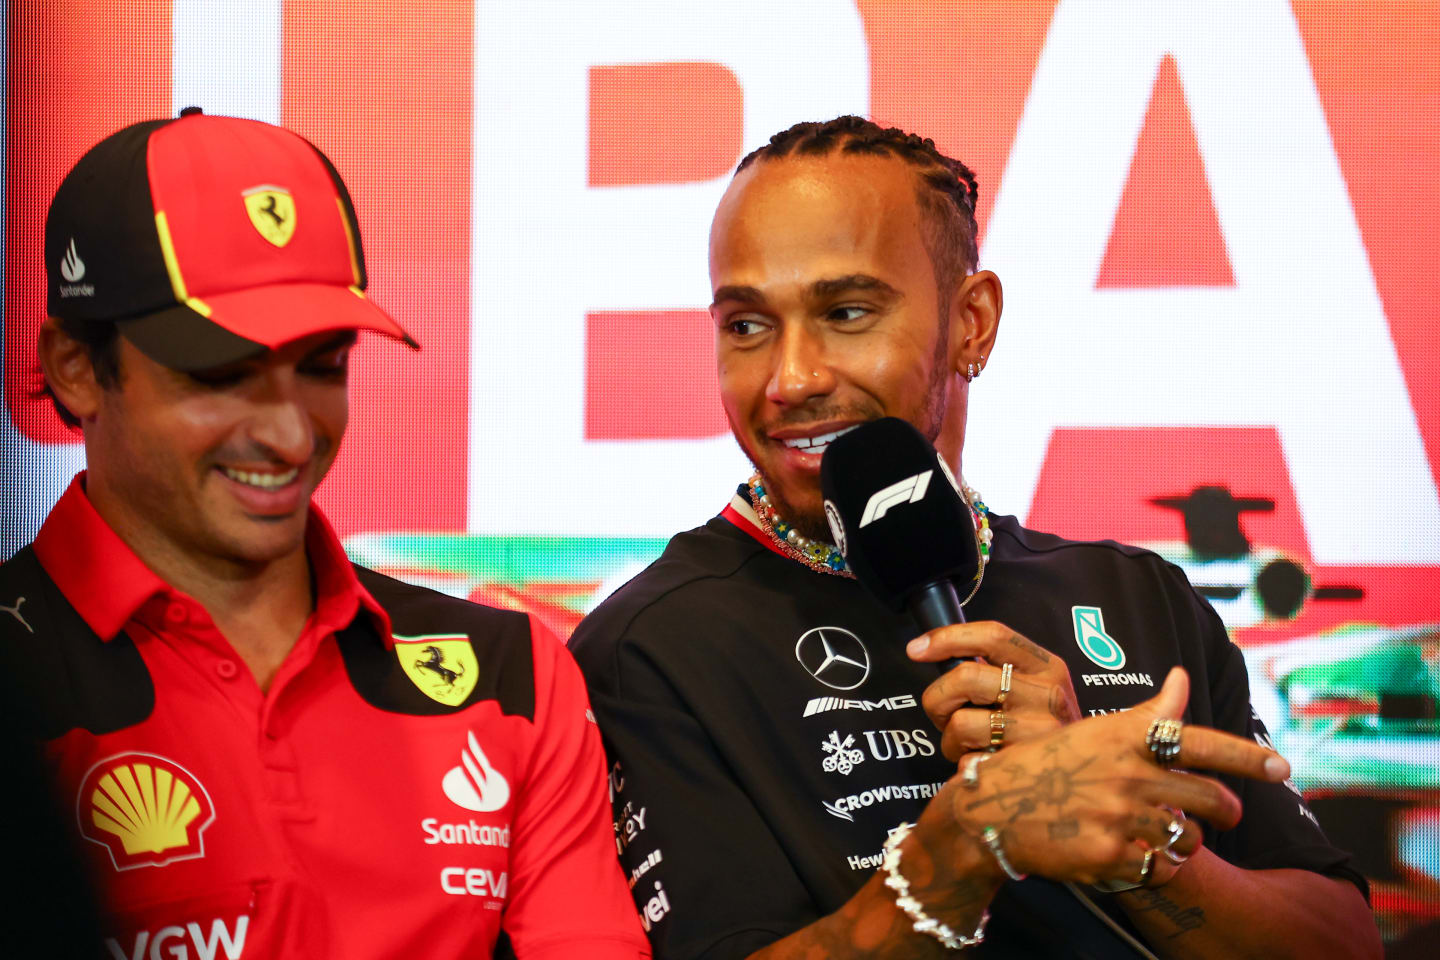 BAKU, AZERBAIJAN - APRIL 27: Lewis Hamilton of Great Britain and Mercedes and Carlos Sainz of Spain and Ferrari talk in a press conference during previews ahead of the F1 Grand Prix of Azerbaijan at Baku City Circuit on April 27, 2023 in Baku, Azerbaijan. (Photo by Bryn Lennon/Getty Images)